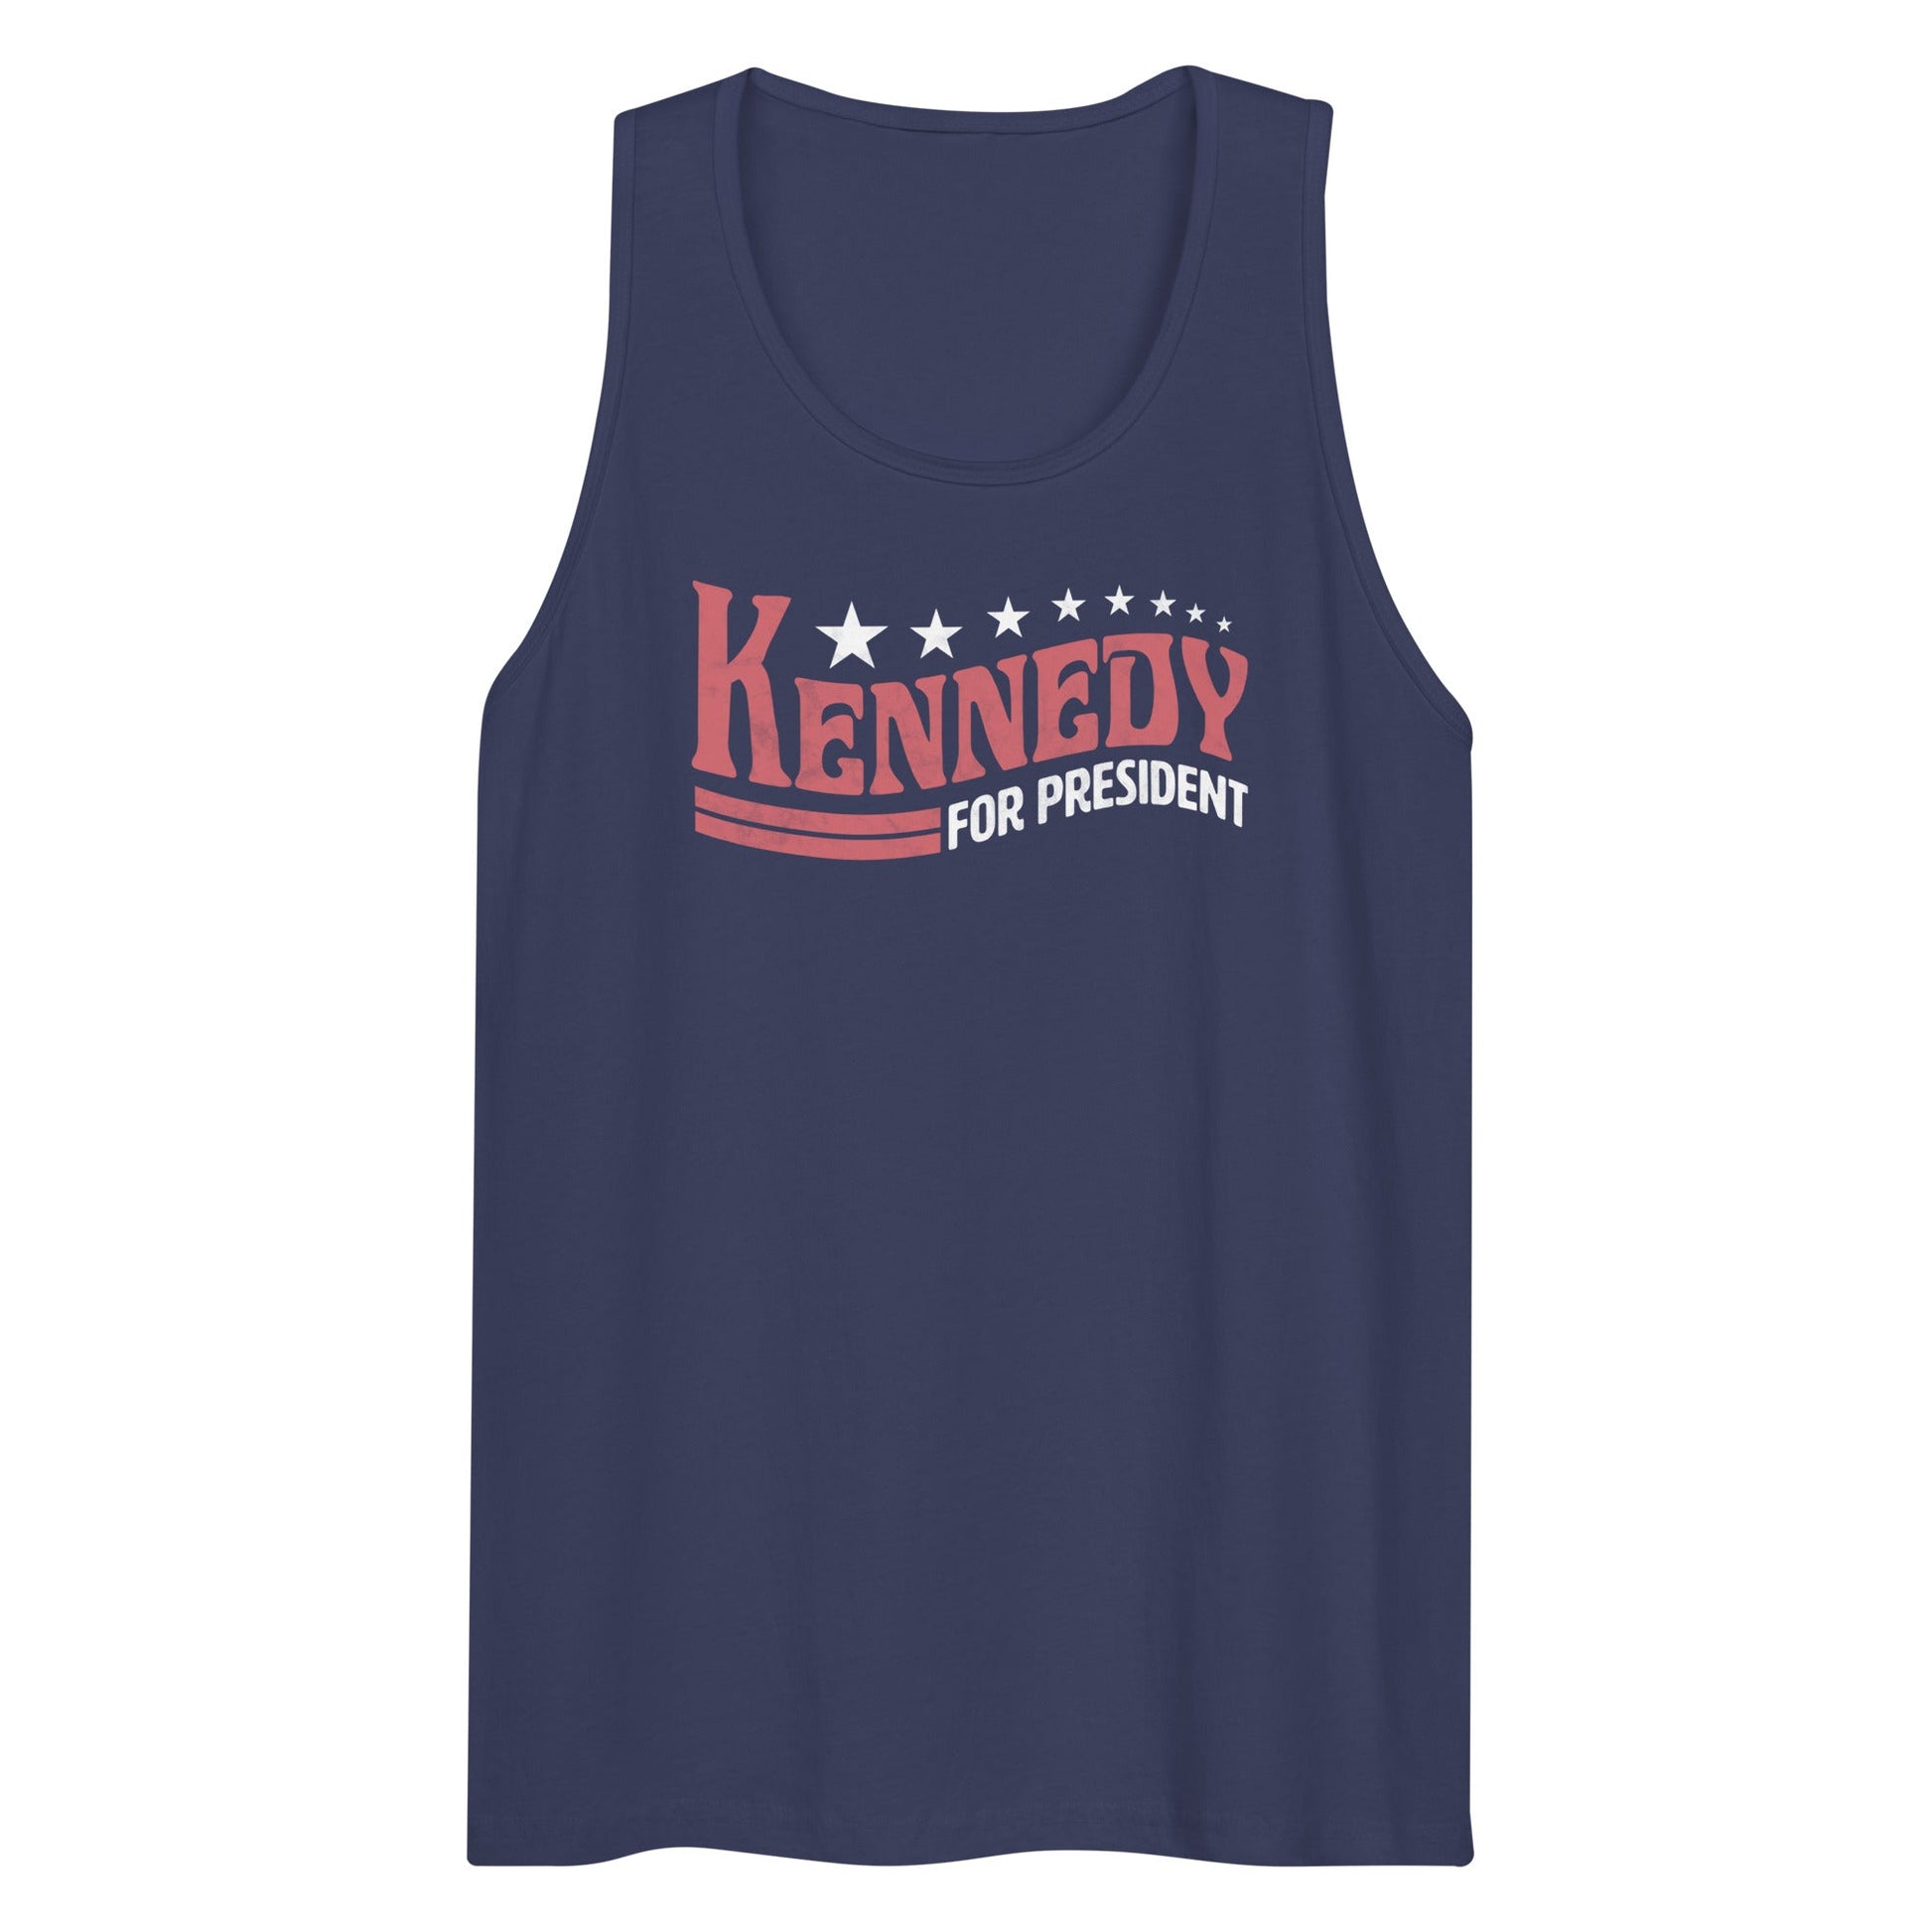 Kennedy for President Vintage Men’s Tank Top - TEAM KENNEDY. All rights reserved